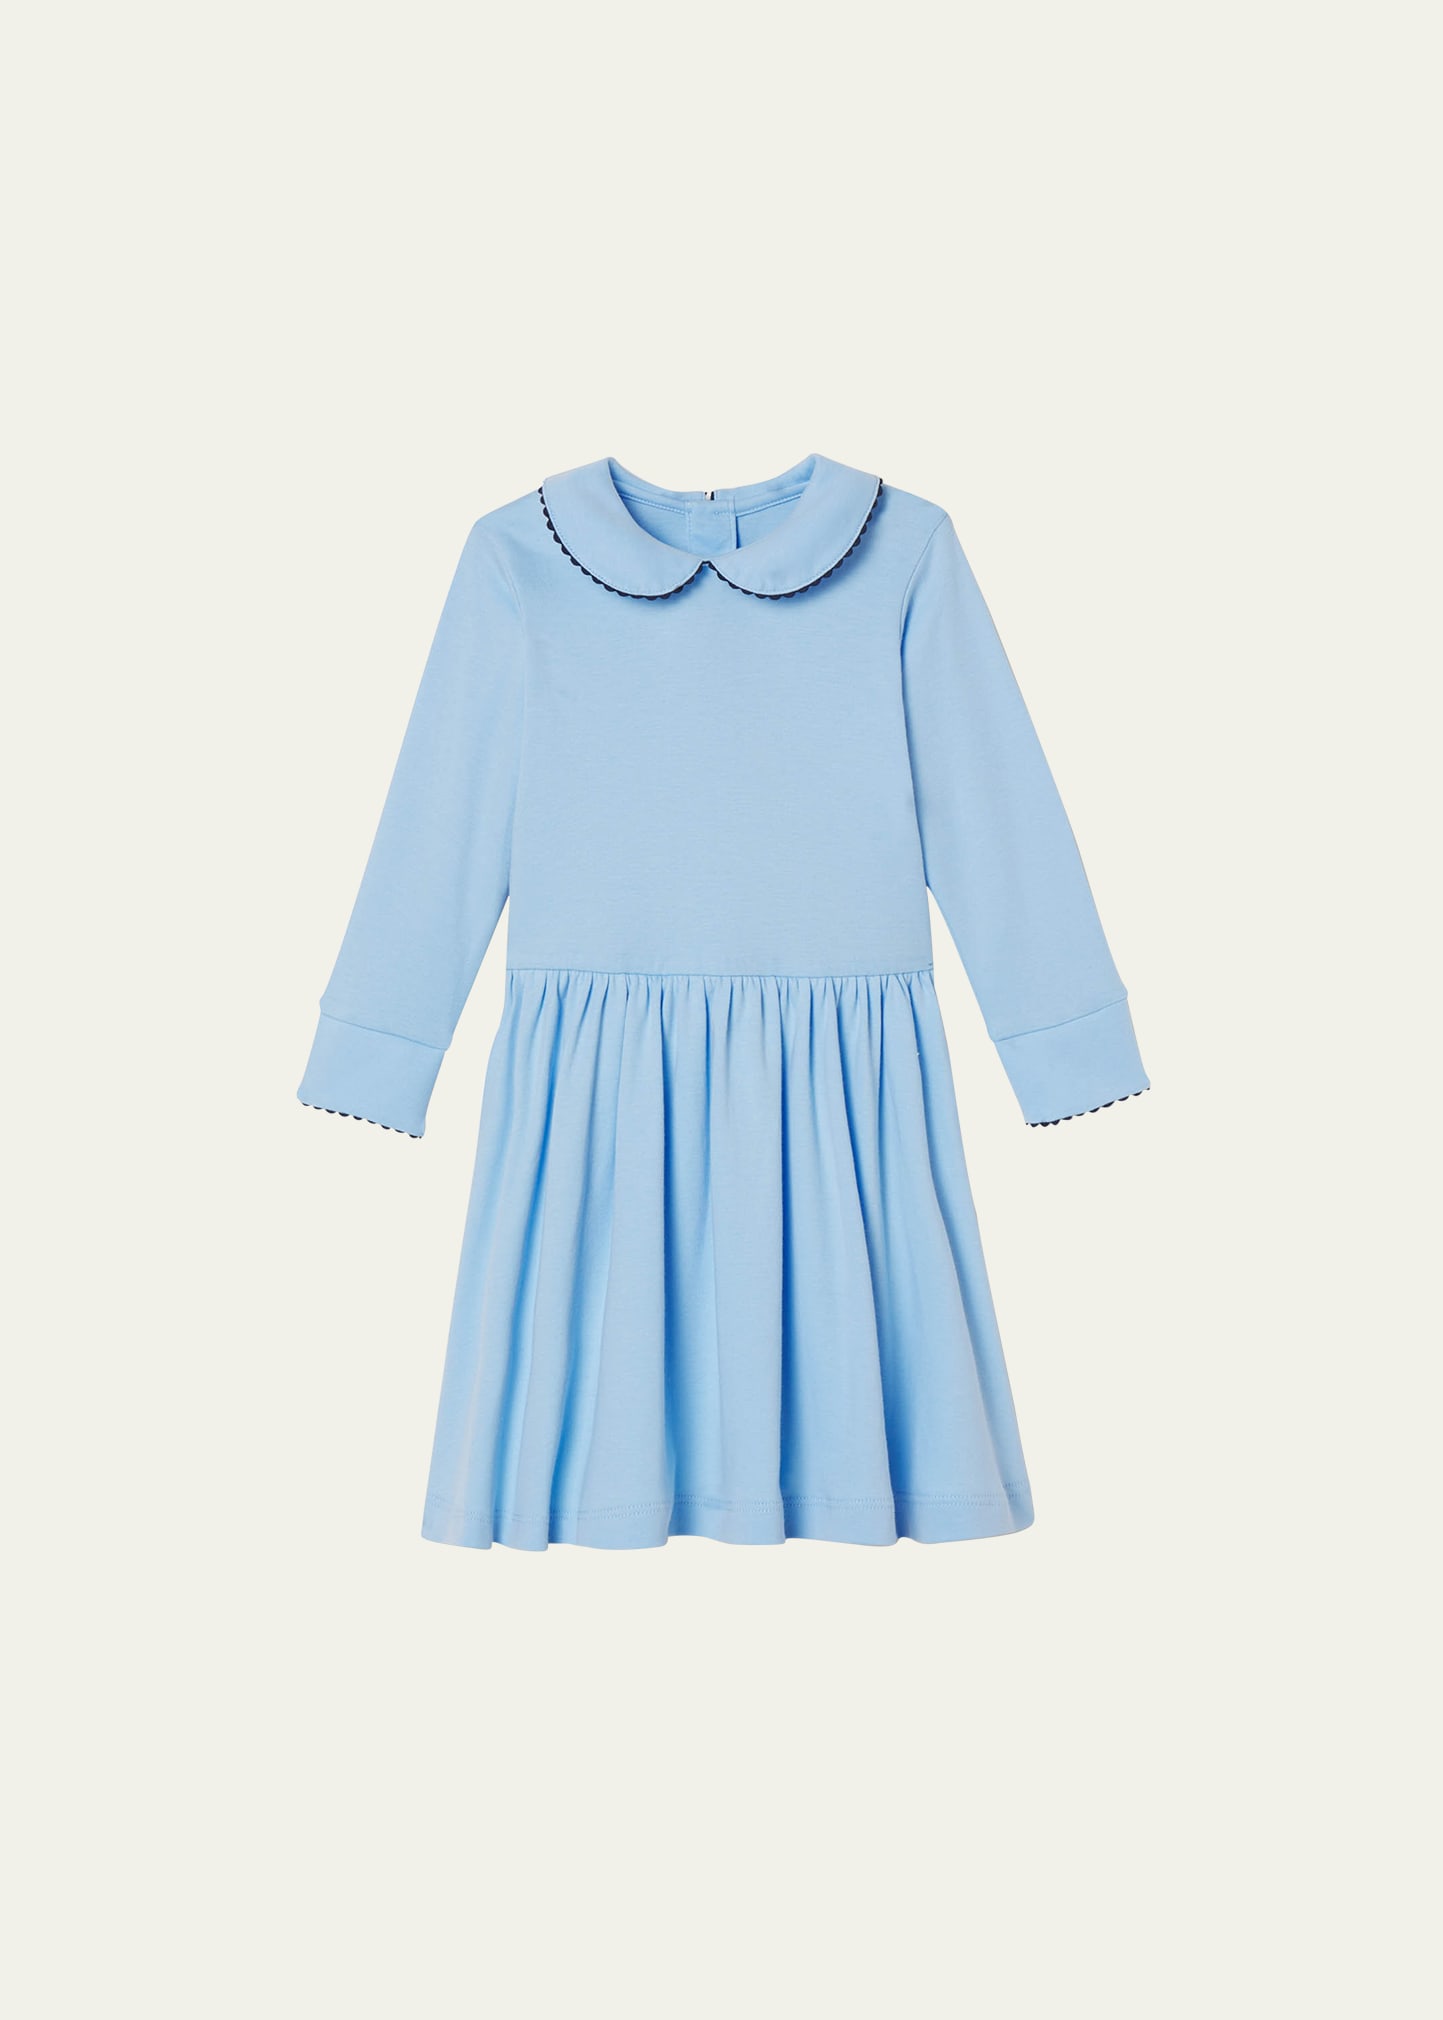 Girl's Claudette Pleated Dress, Size 5-14